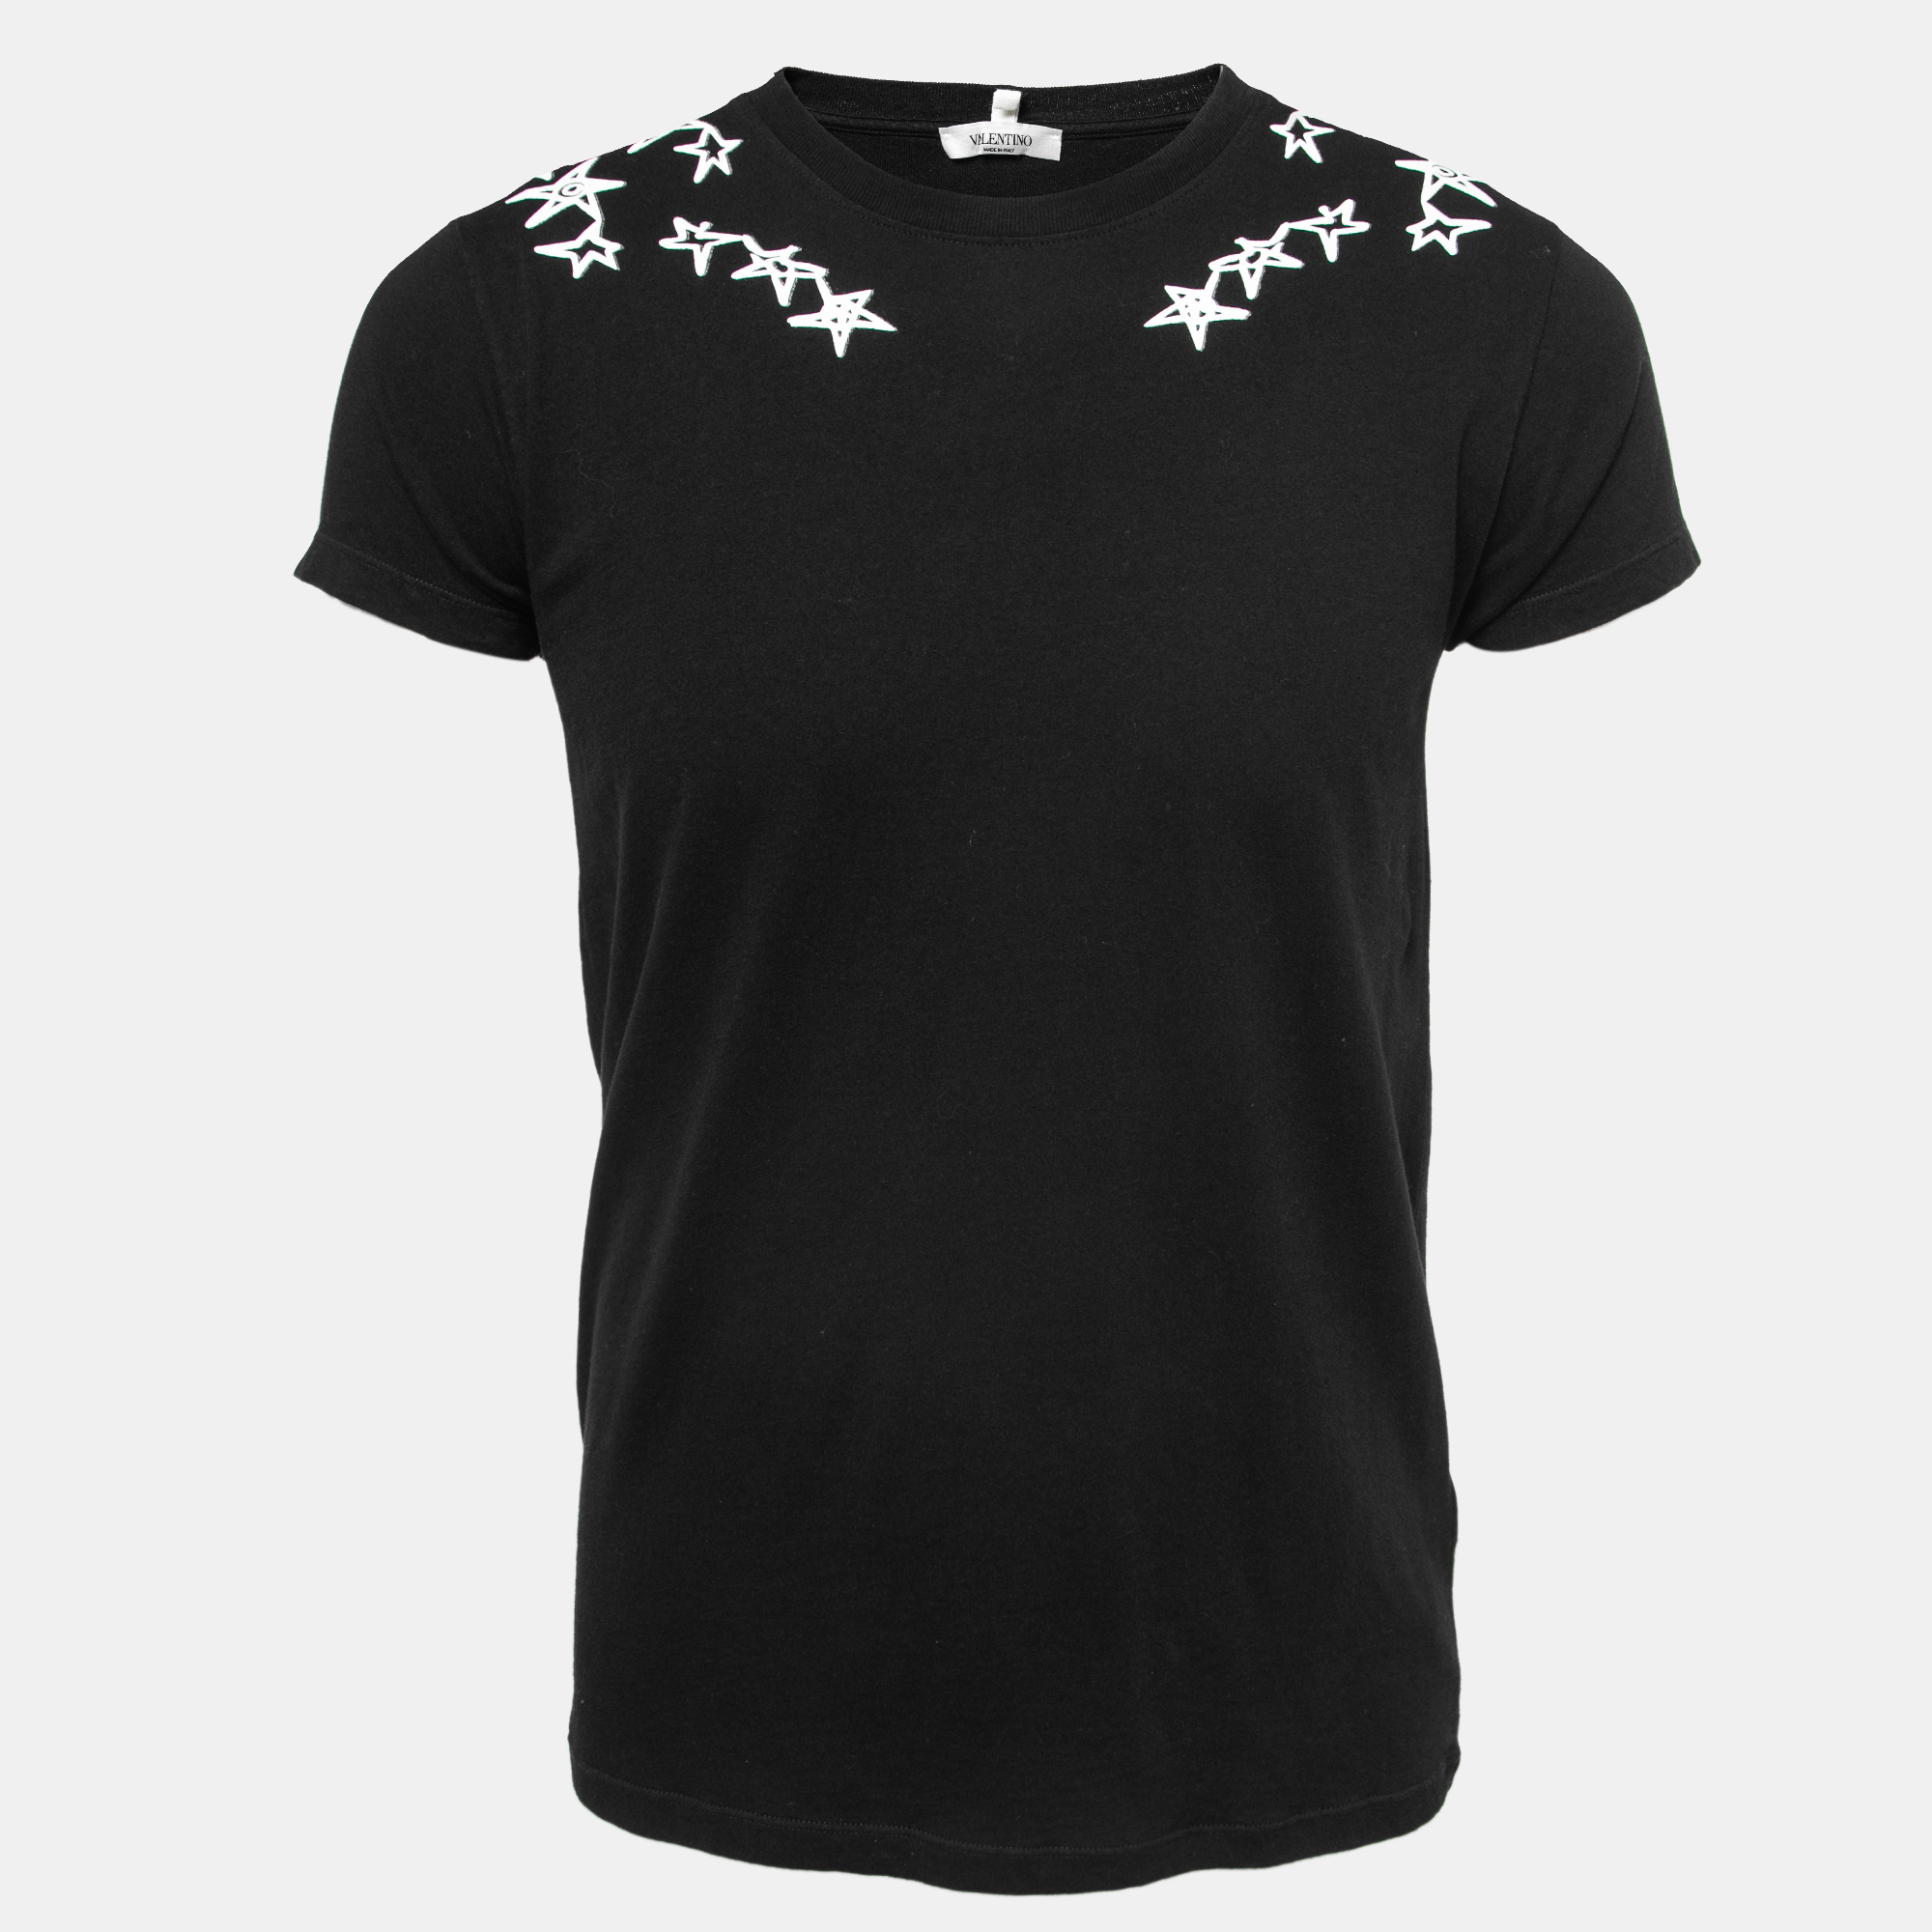 VALENTINO Pre-owned Black Star Printed Cotton Short Sleeve T-shirt Xs